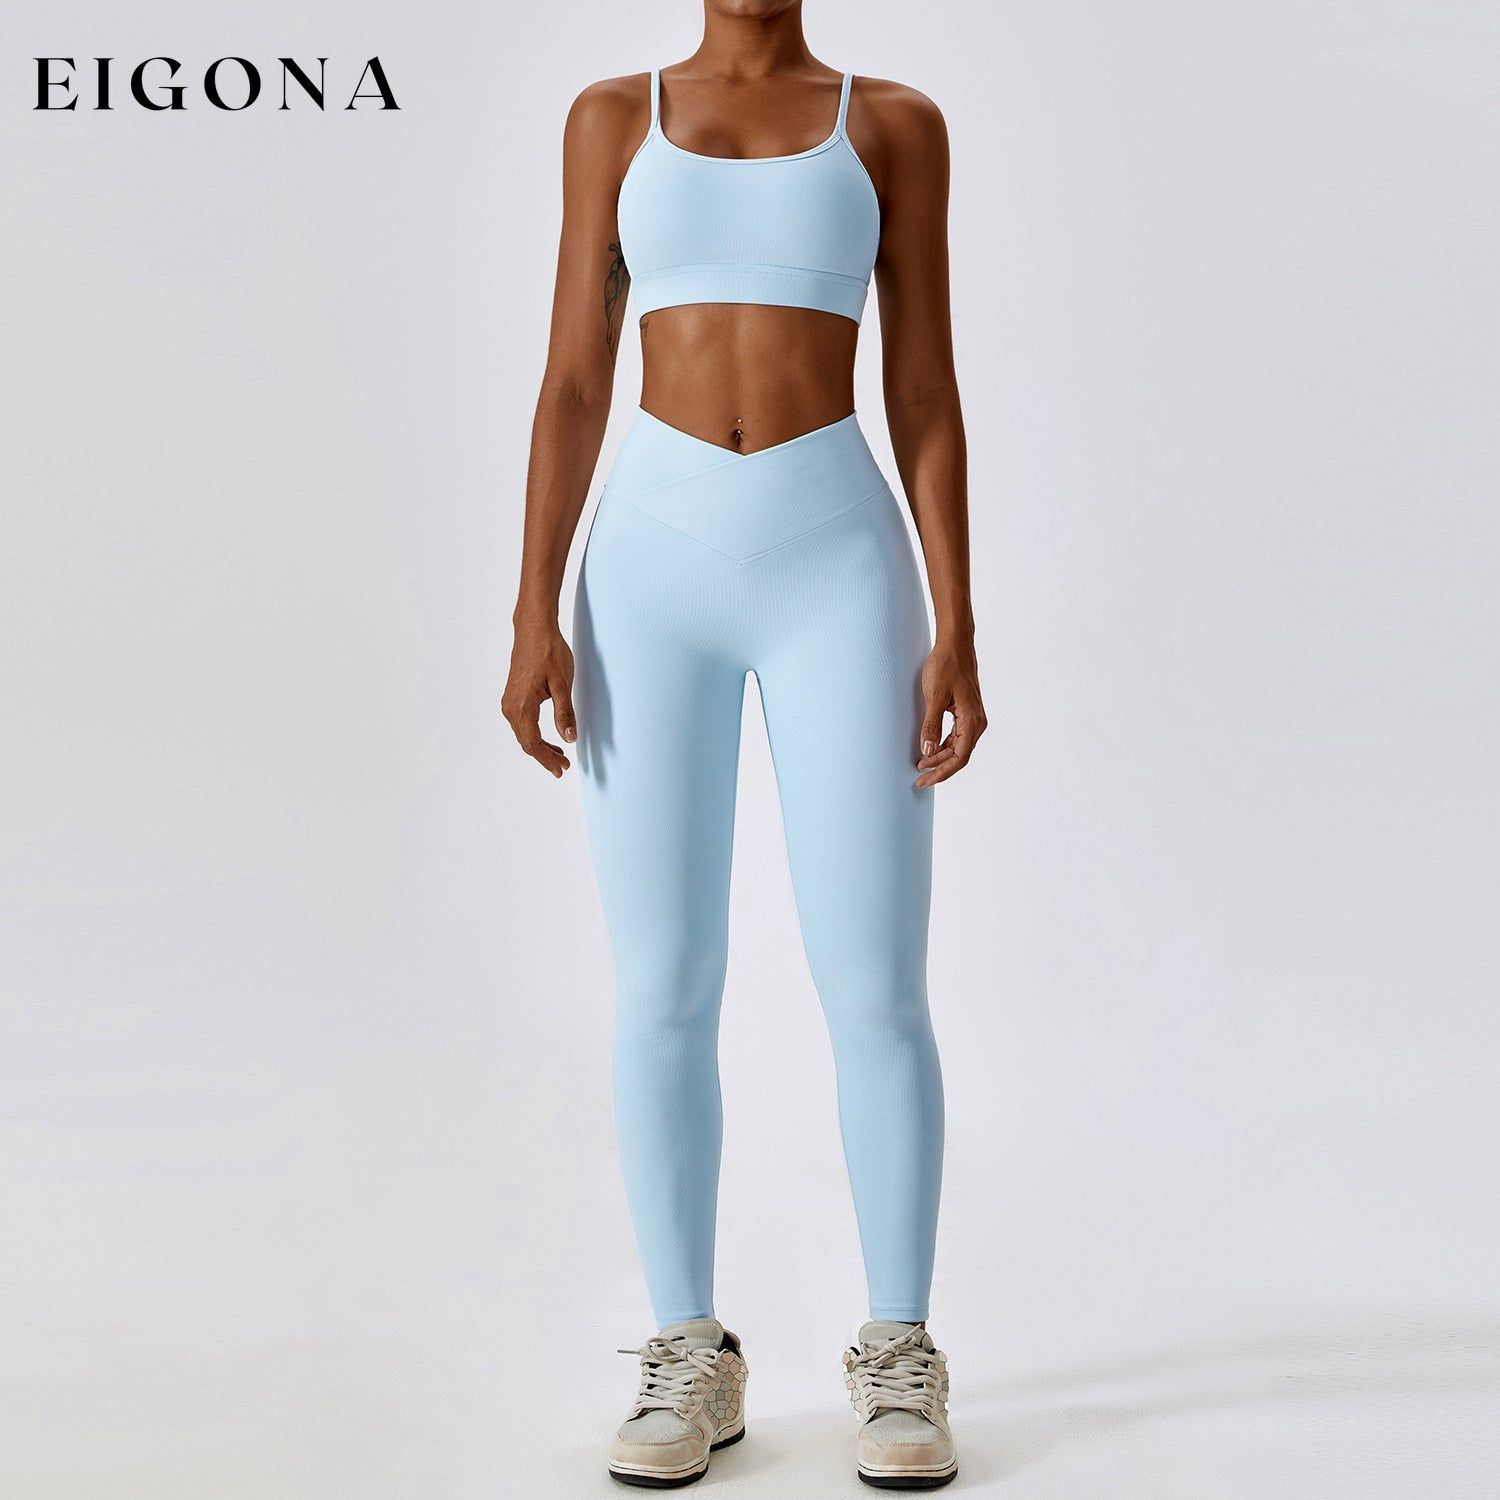 Thread Abdominal Shaping High Waist Beauty Back Yoga Suit Quick Drying Push up Hip Raise Skinny Workout Exercise Outfit 2 piece activewear clothes set workout